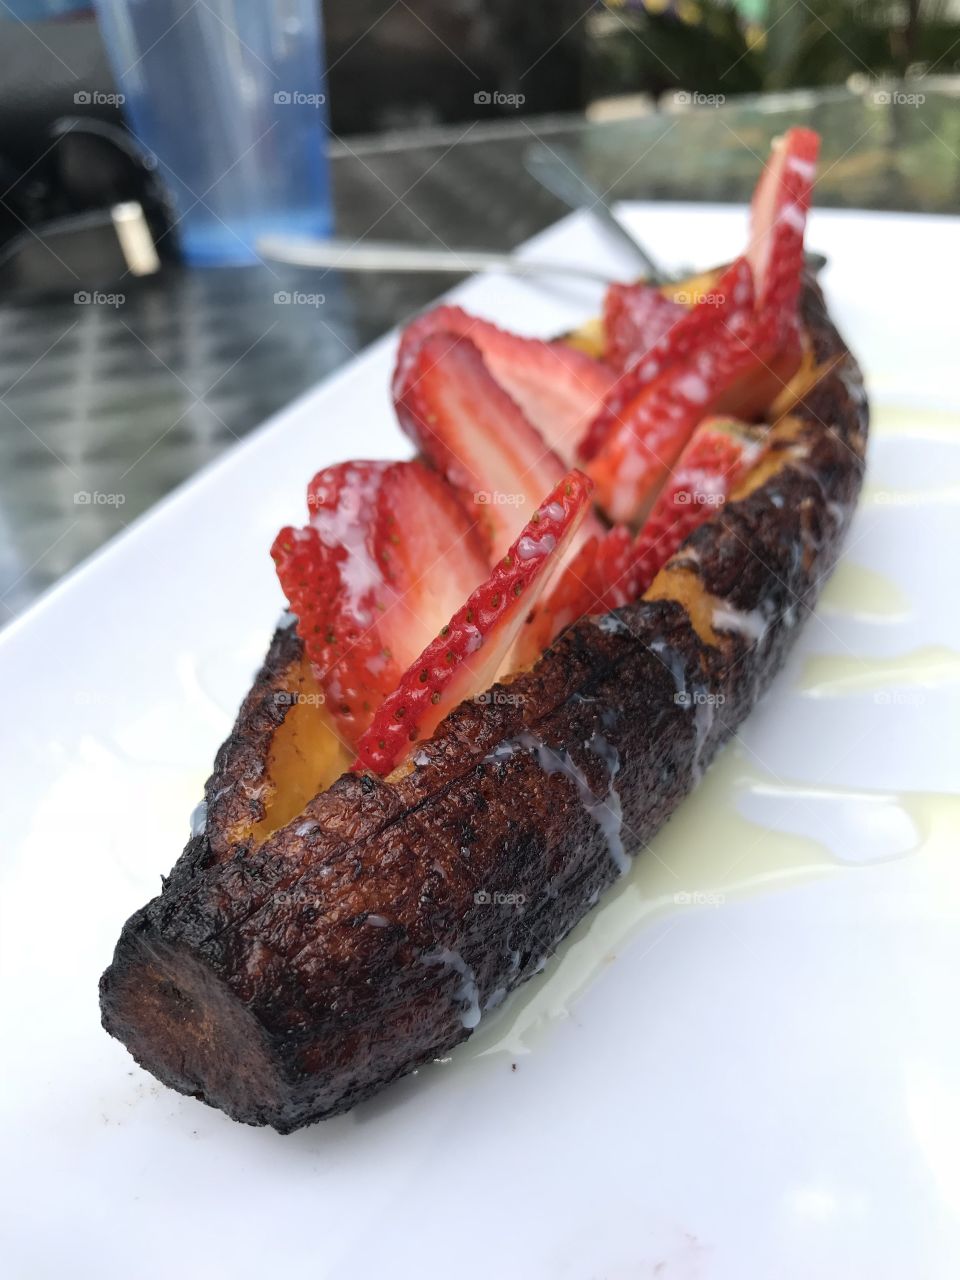 Dessert- Fried Plantain with Strawberries and Sweetend Condensed Milk @ Chandos in Sacramento, California 